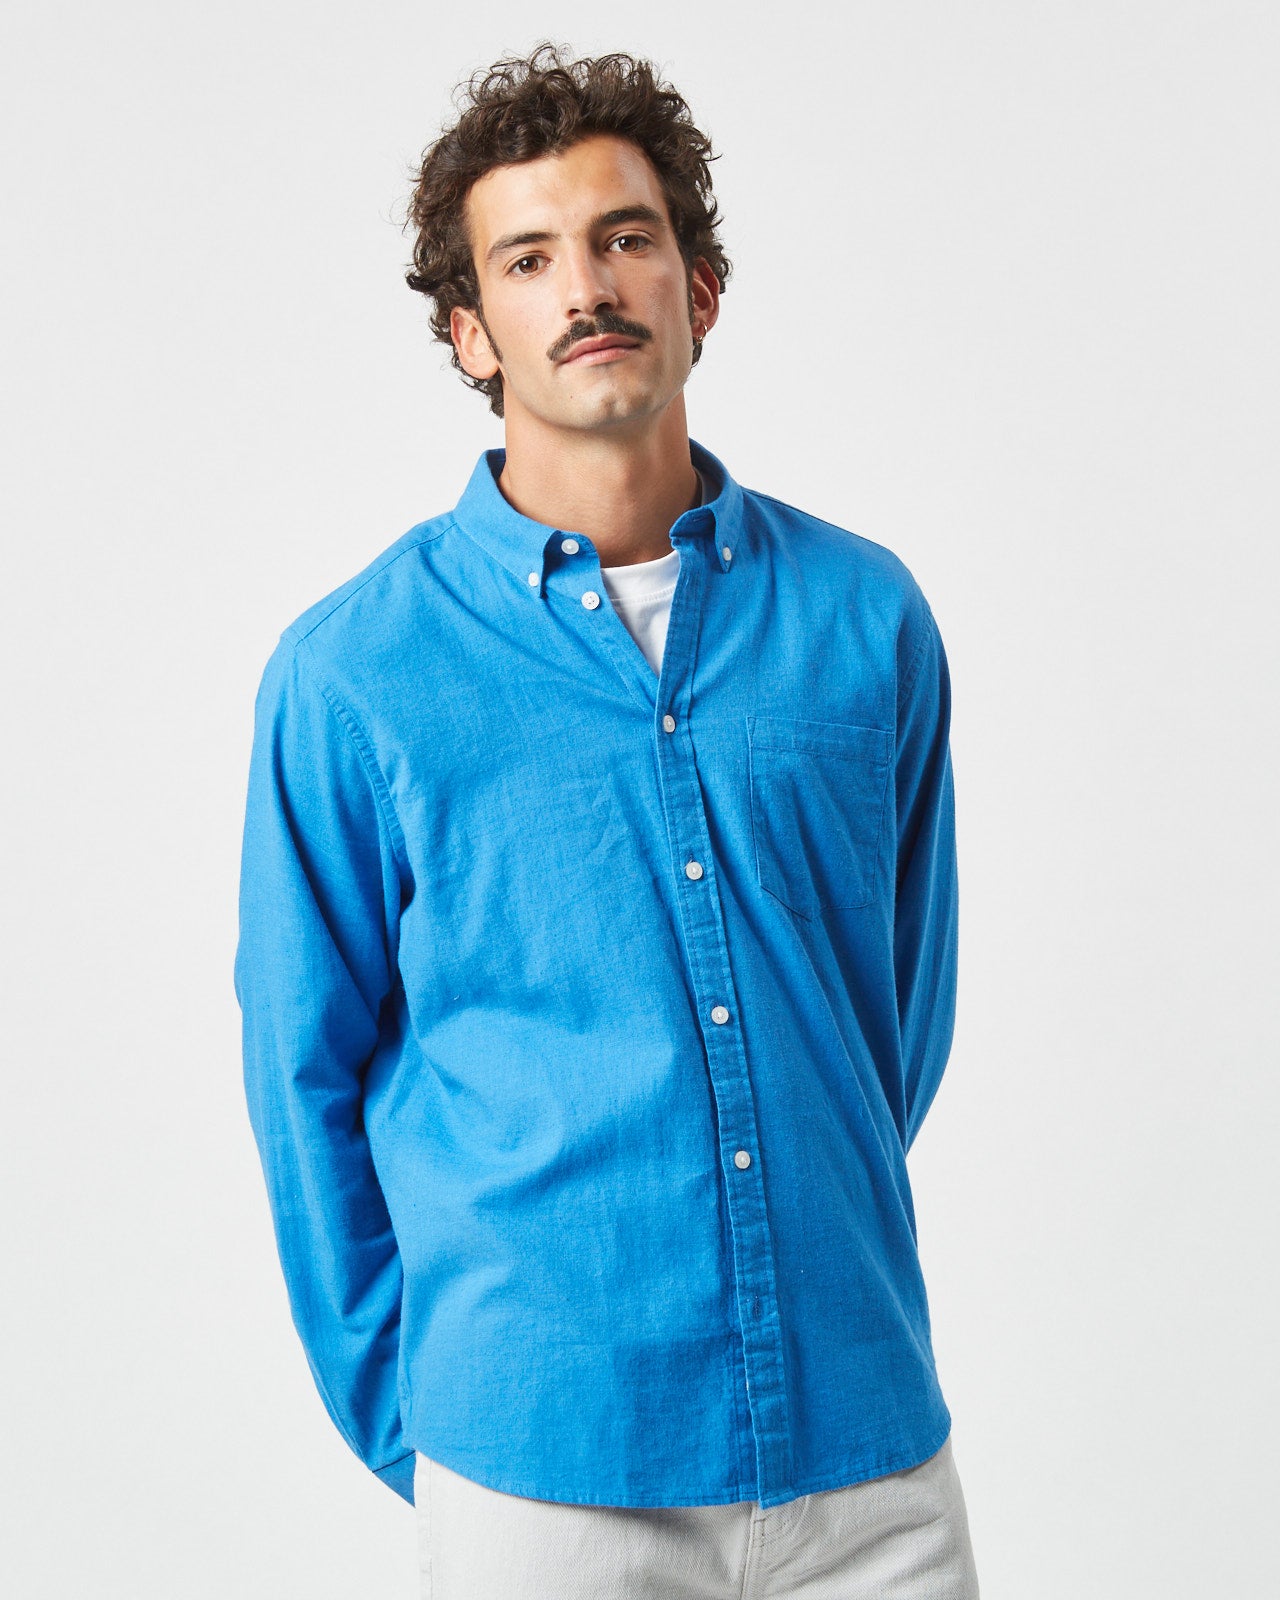 the Minimum Men's Jay Shirt in French Blue on a model posing with his hands behind his back